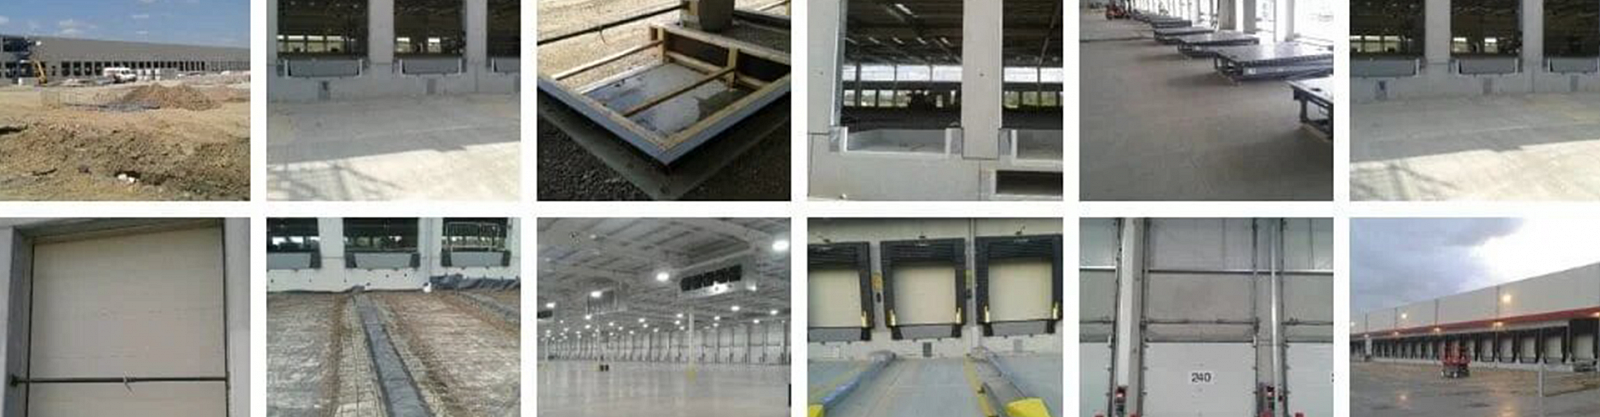 Crick installation of distribution centre products